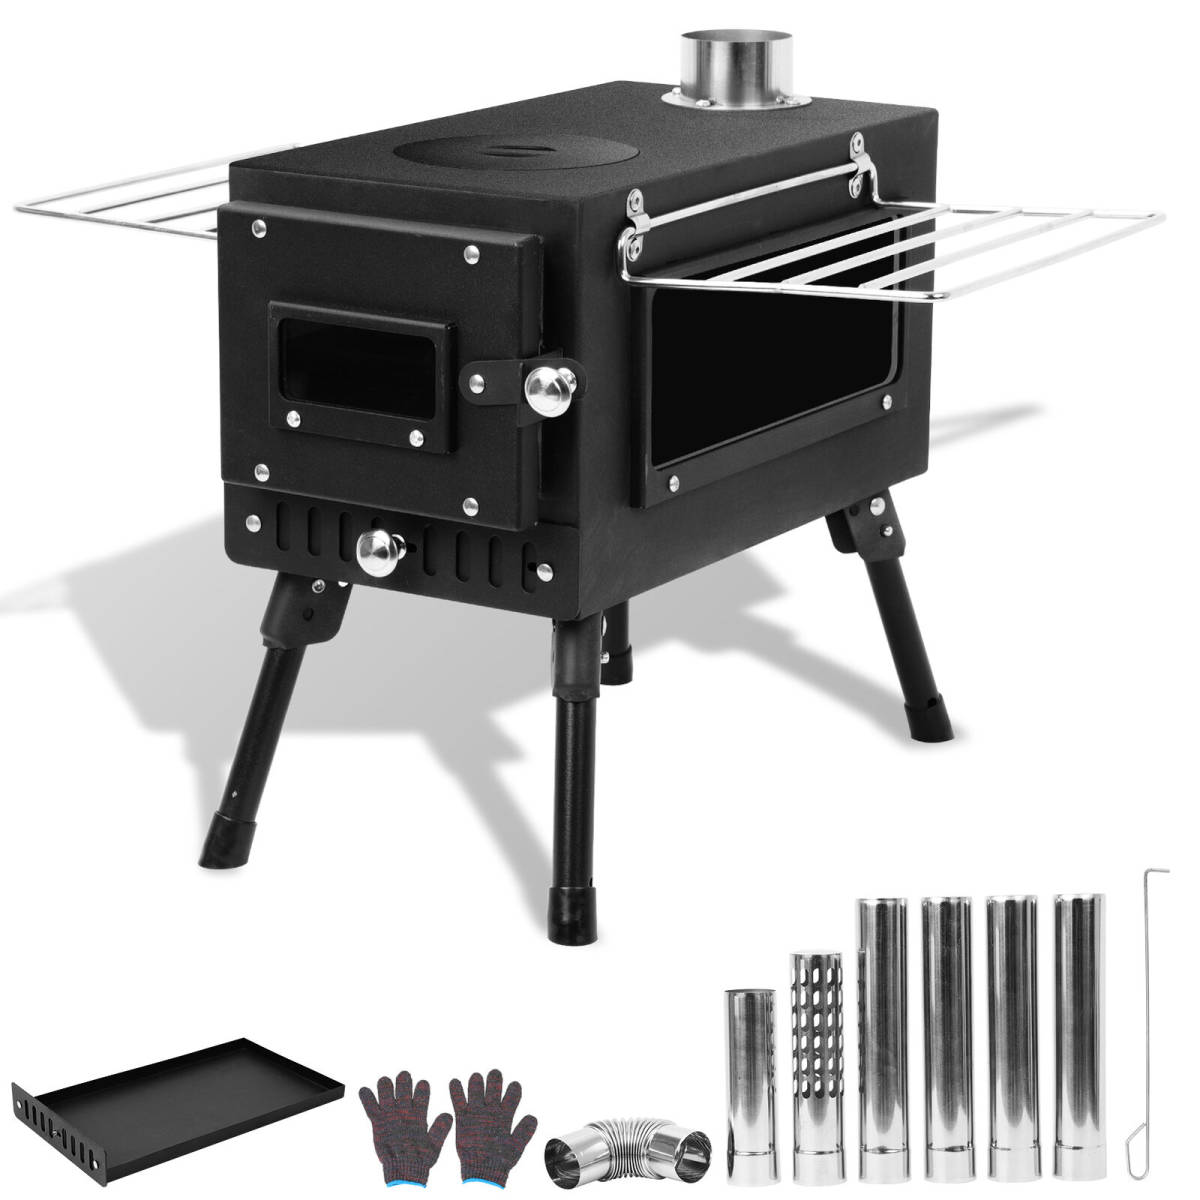 Outdoor Wood Stove Portable Camping Stove Tent Heating Cooking Ash Catcher Box 海外 即決